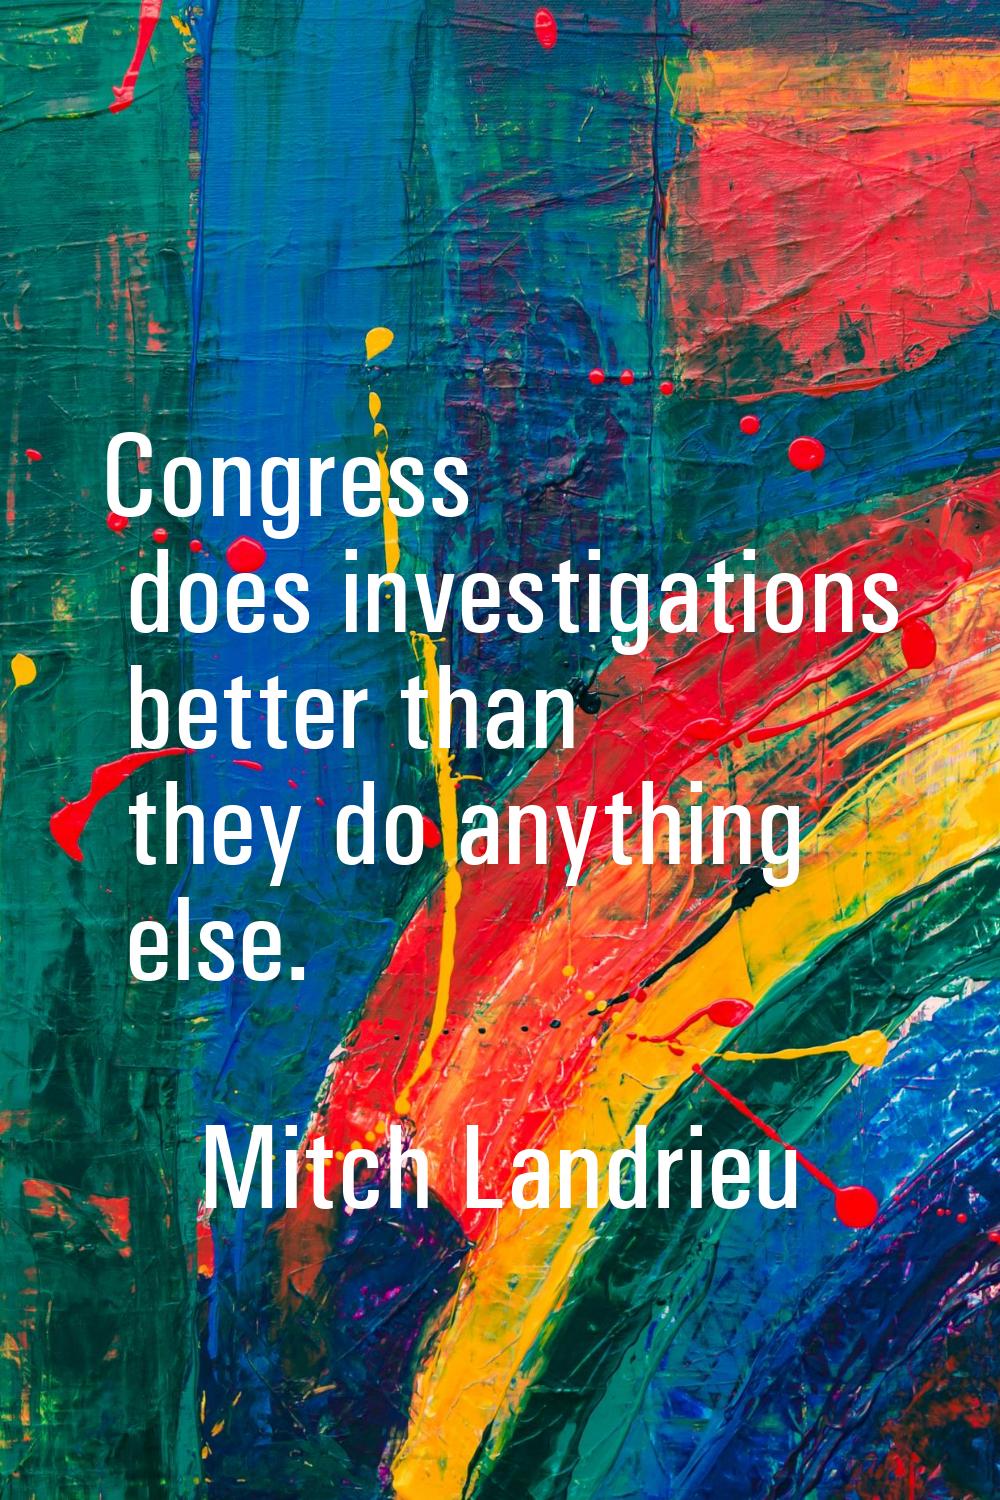 Congress does investigations better than they do anything else.